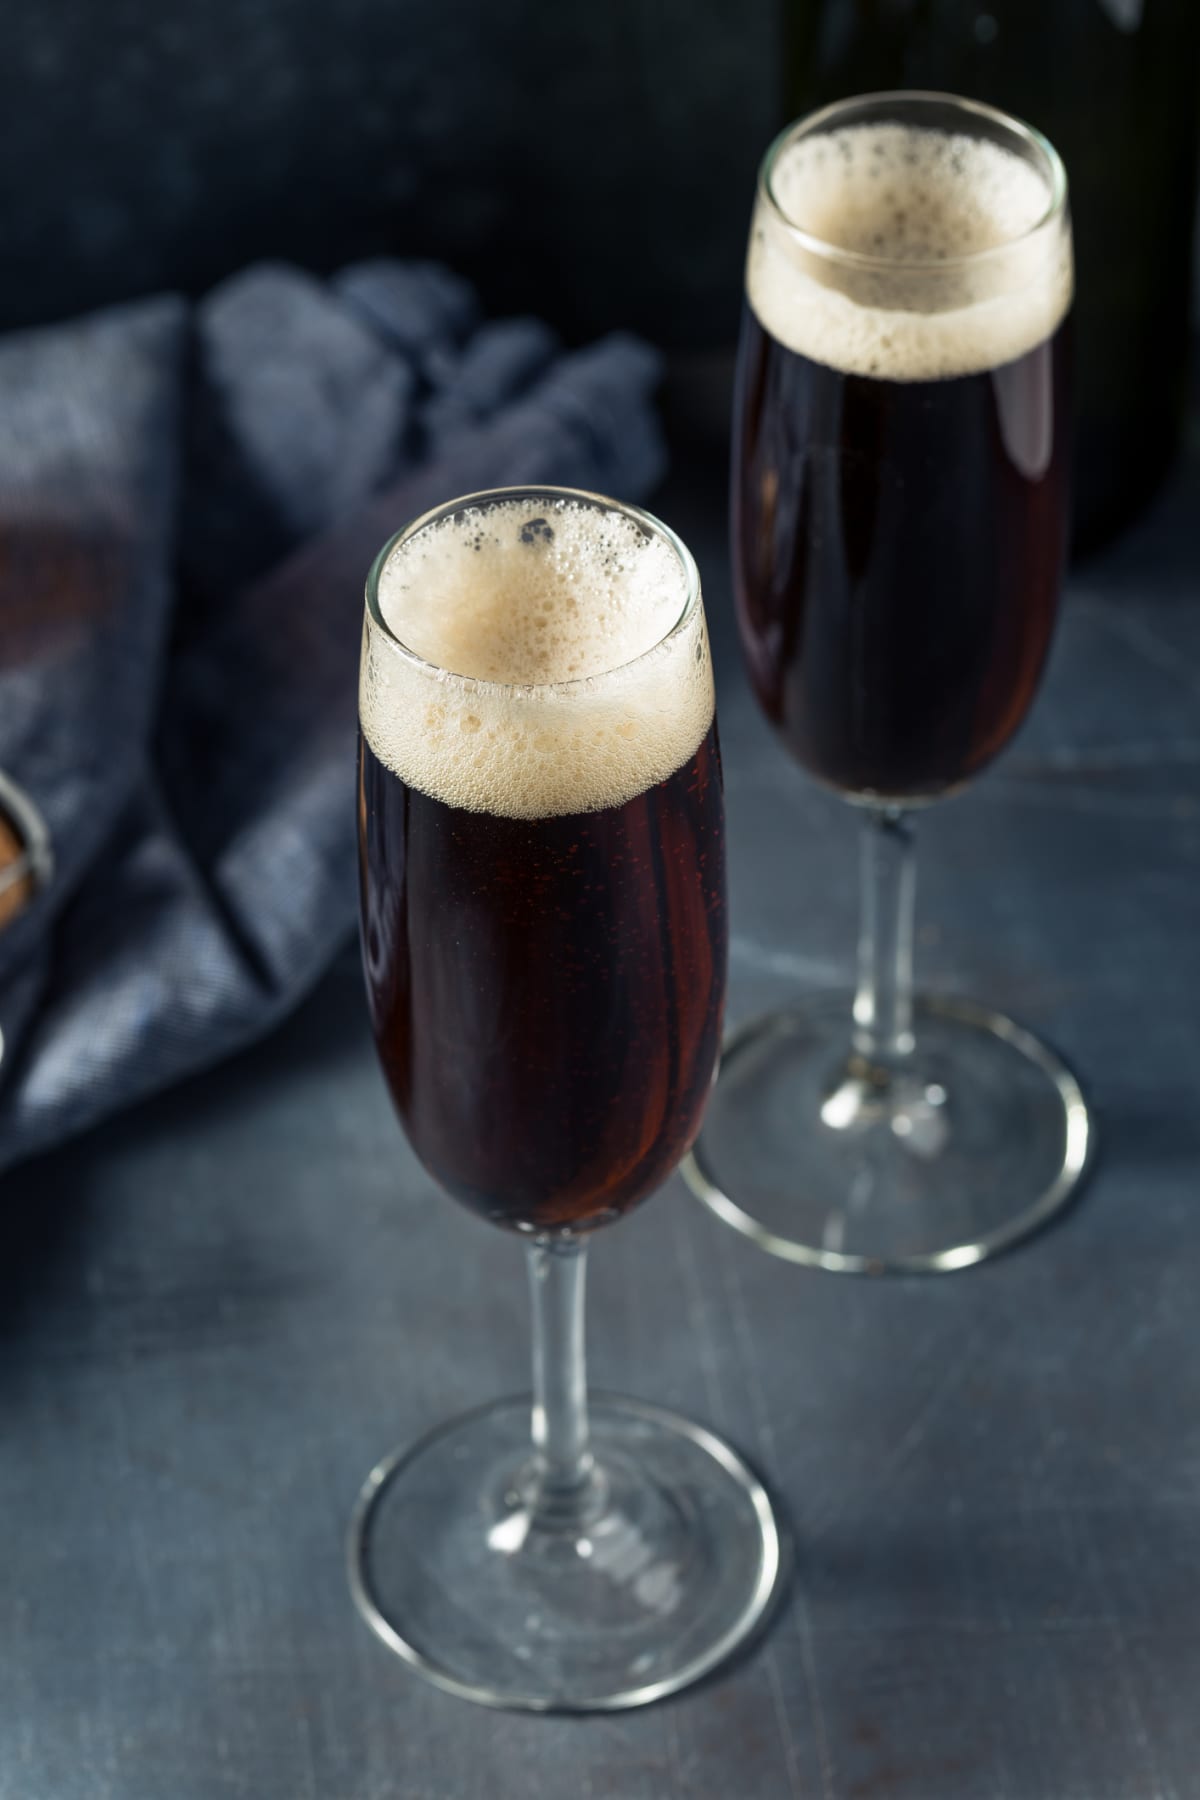 Black Velvet: A Dreamy Cocktail That Mixes Hearty Stout And Crisp Champagne